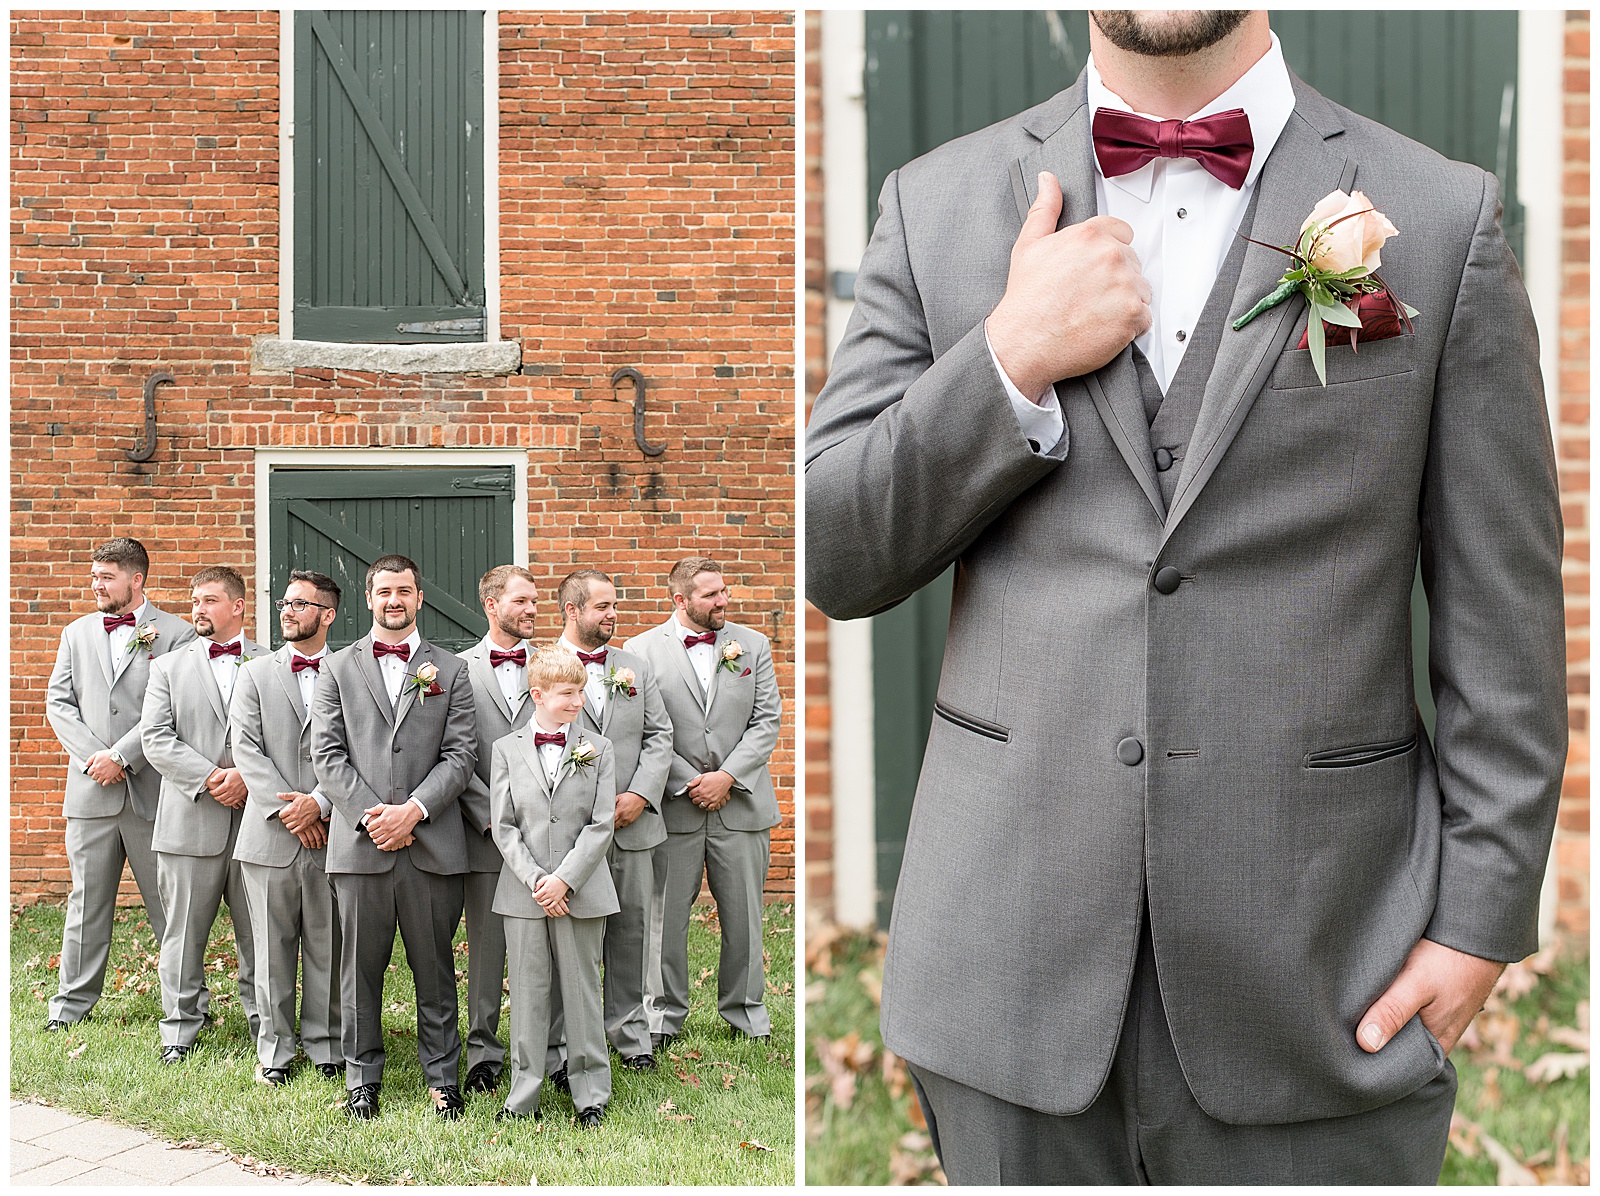 groom with groomsmen in gray suits by brick building on golf course